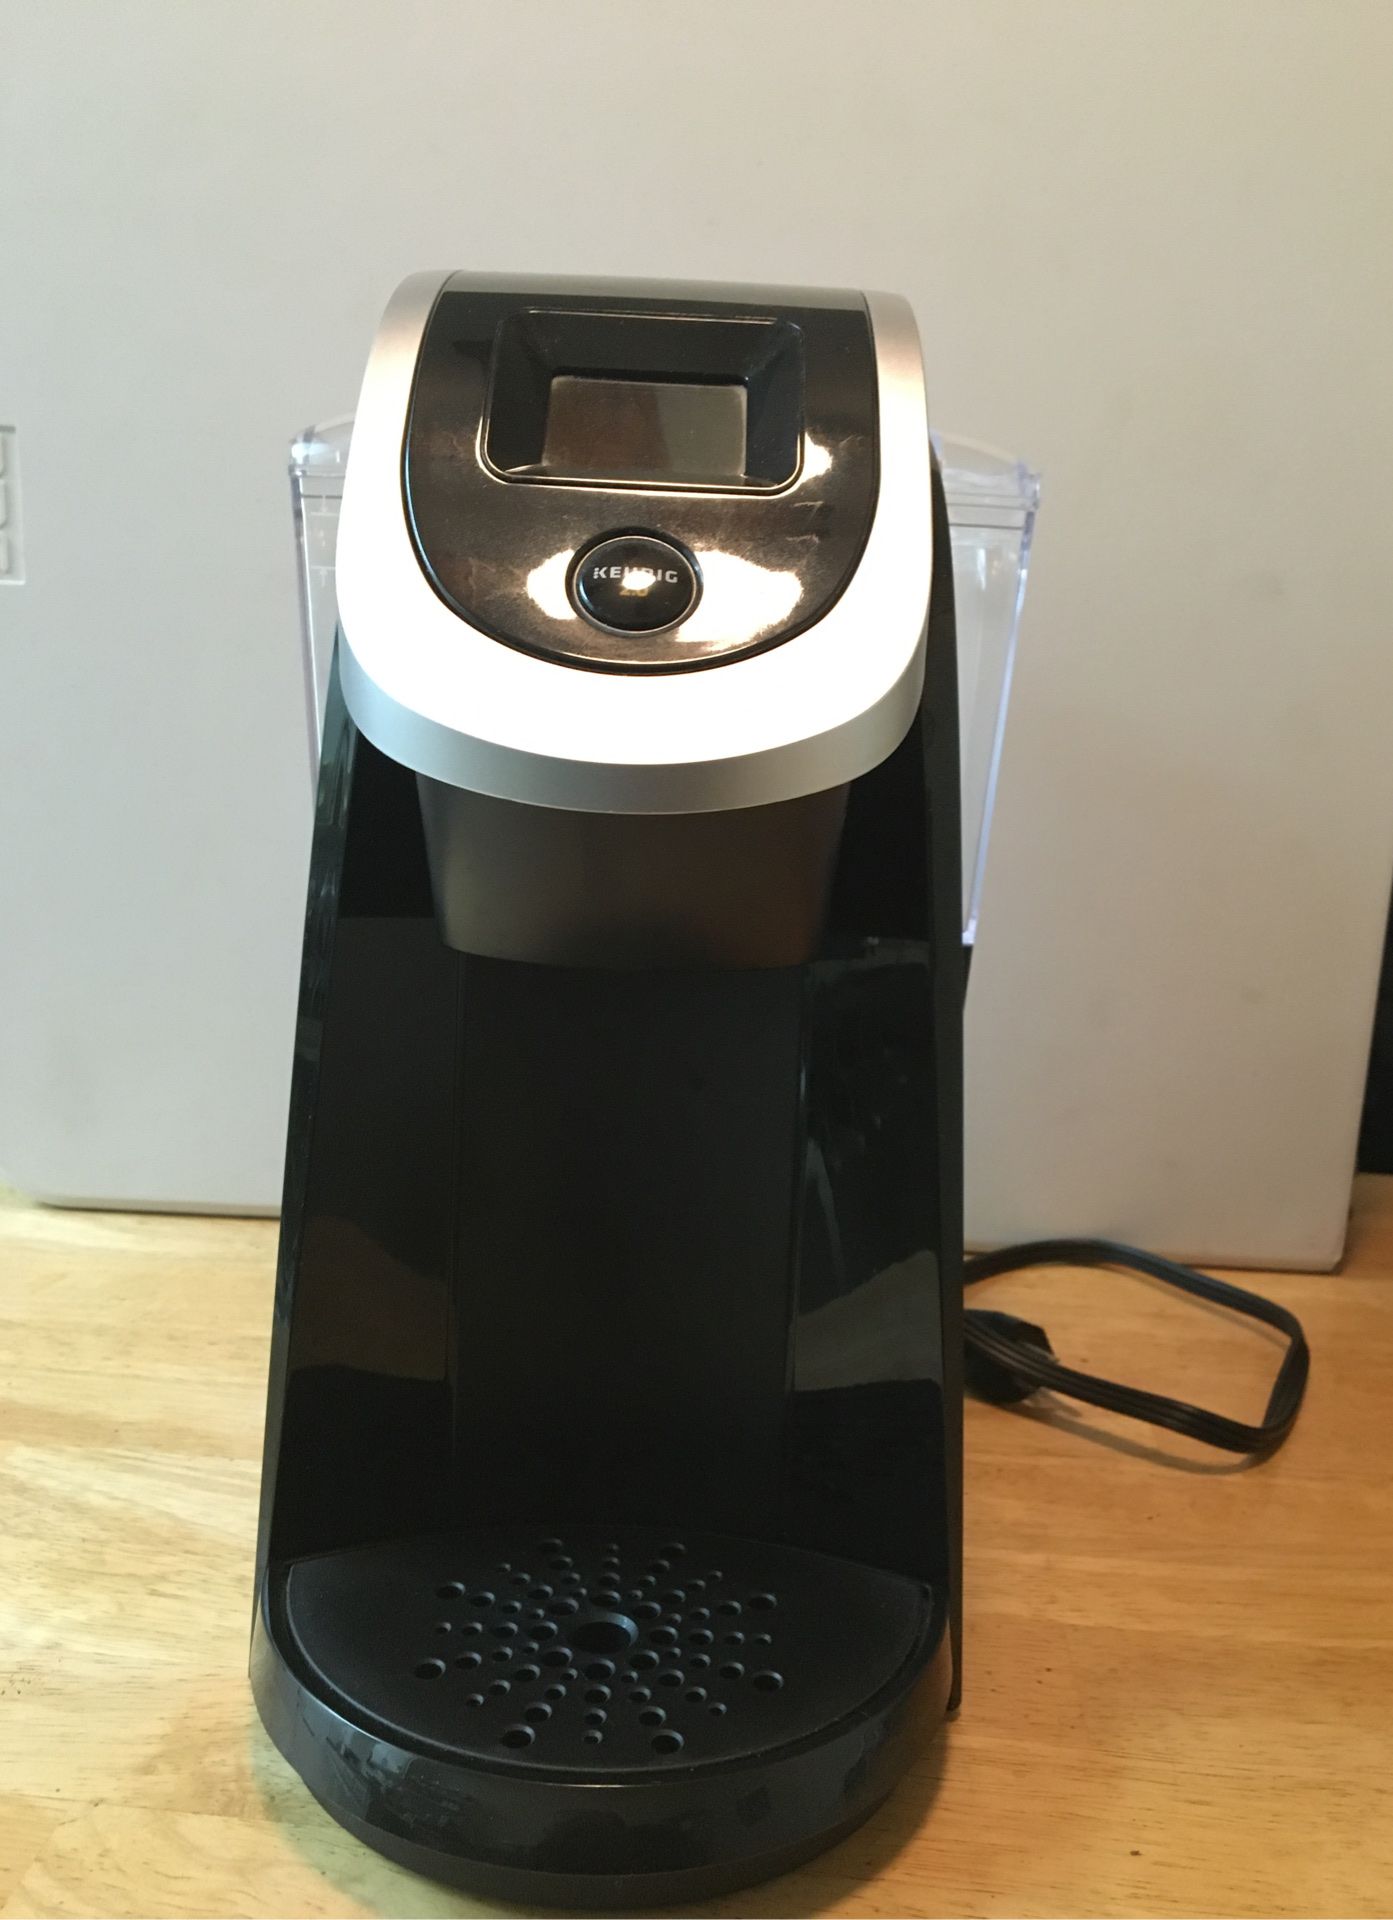 Keurig 2.0 Black in good condition. Includes one filter cartridge and a my k-cup.